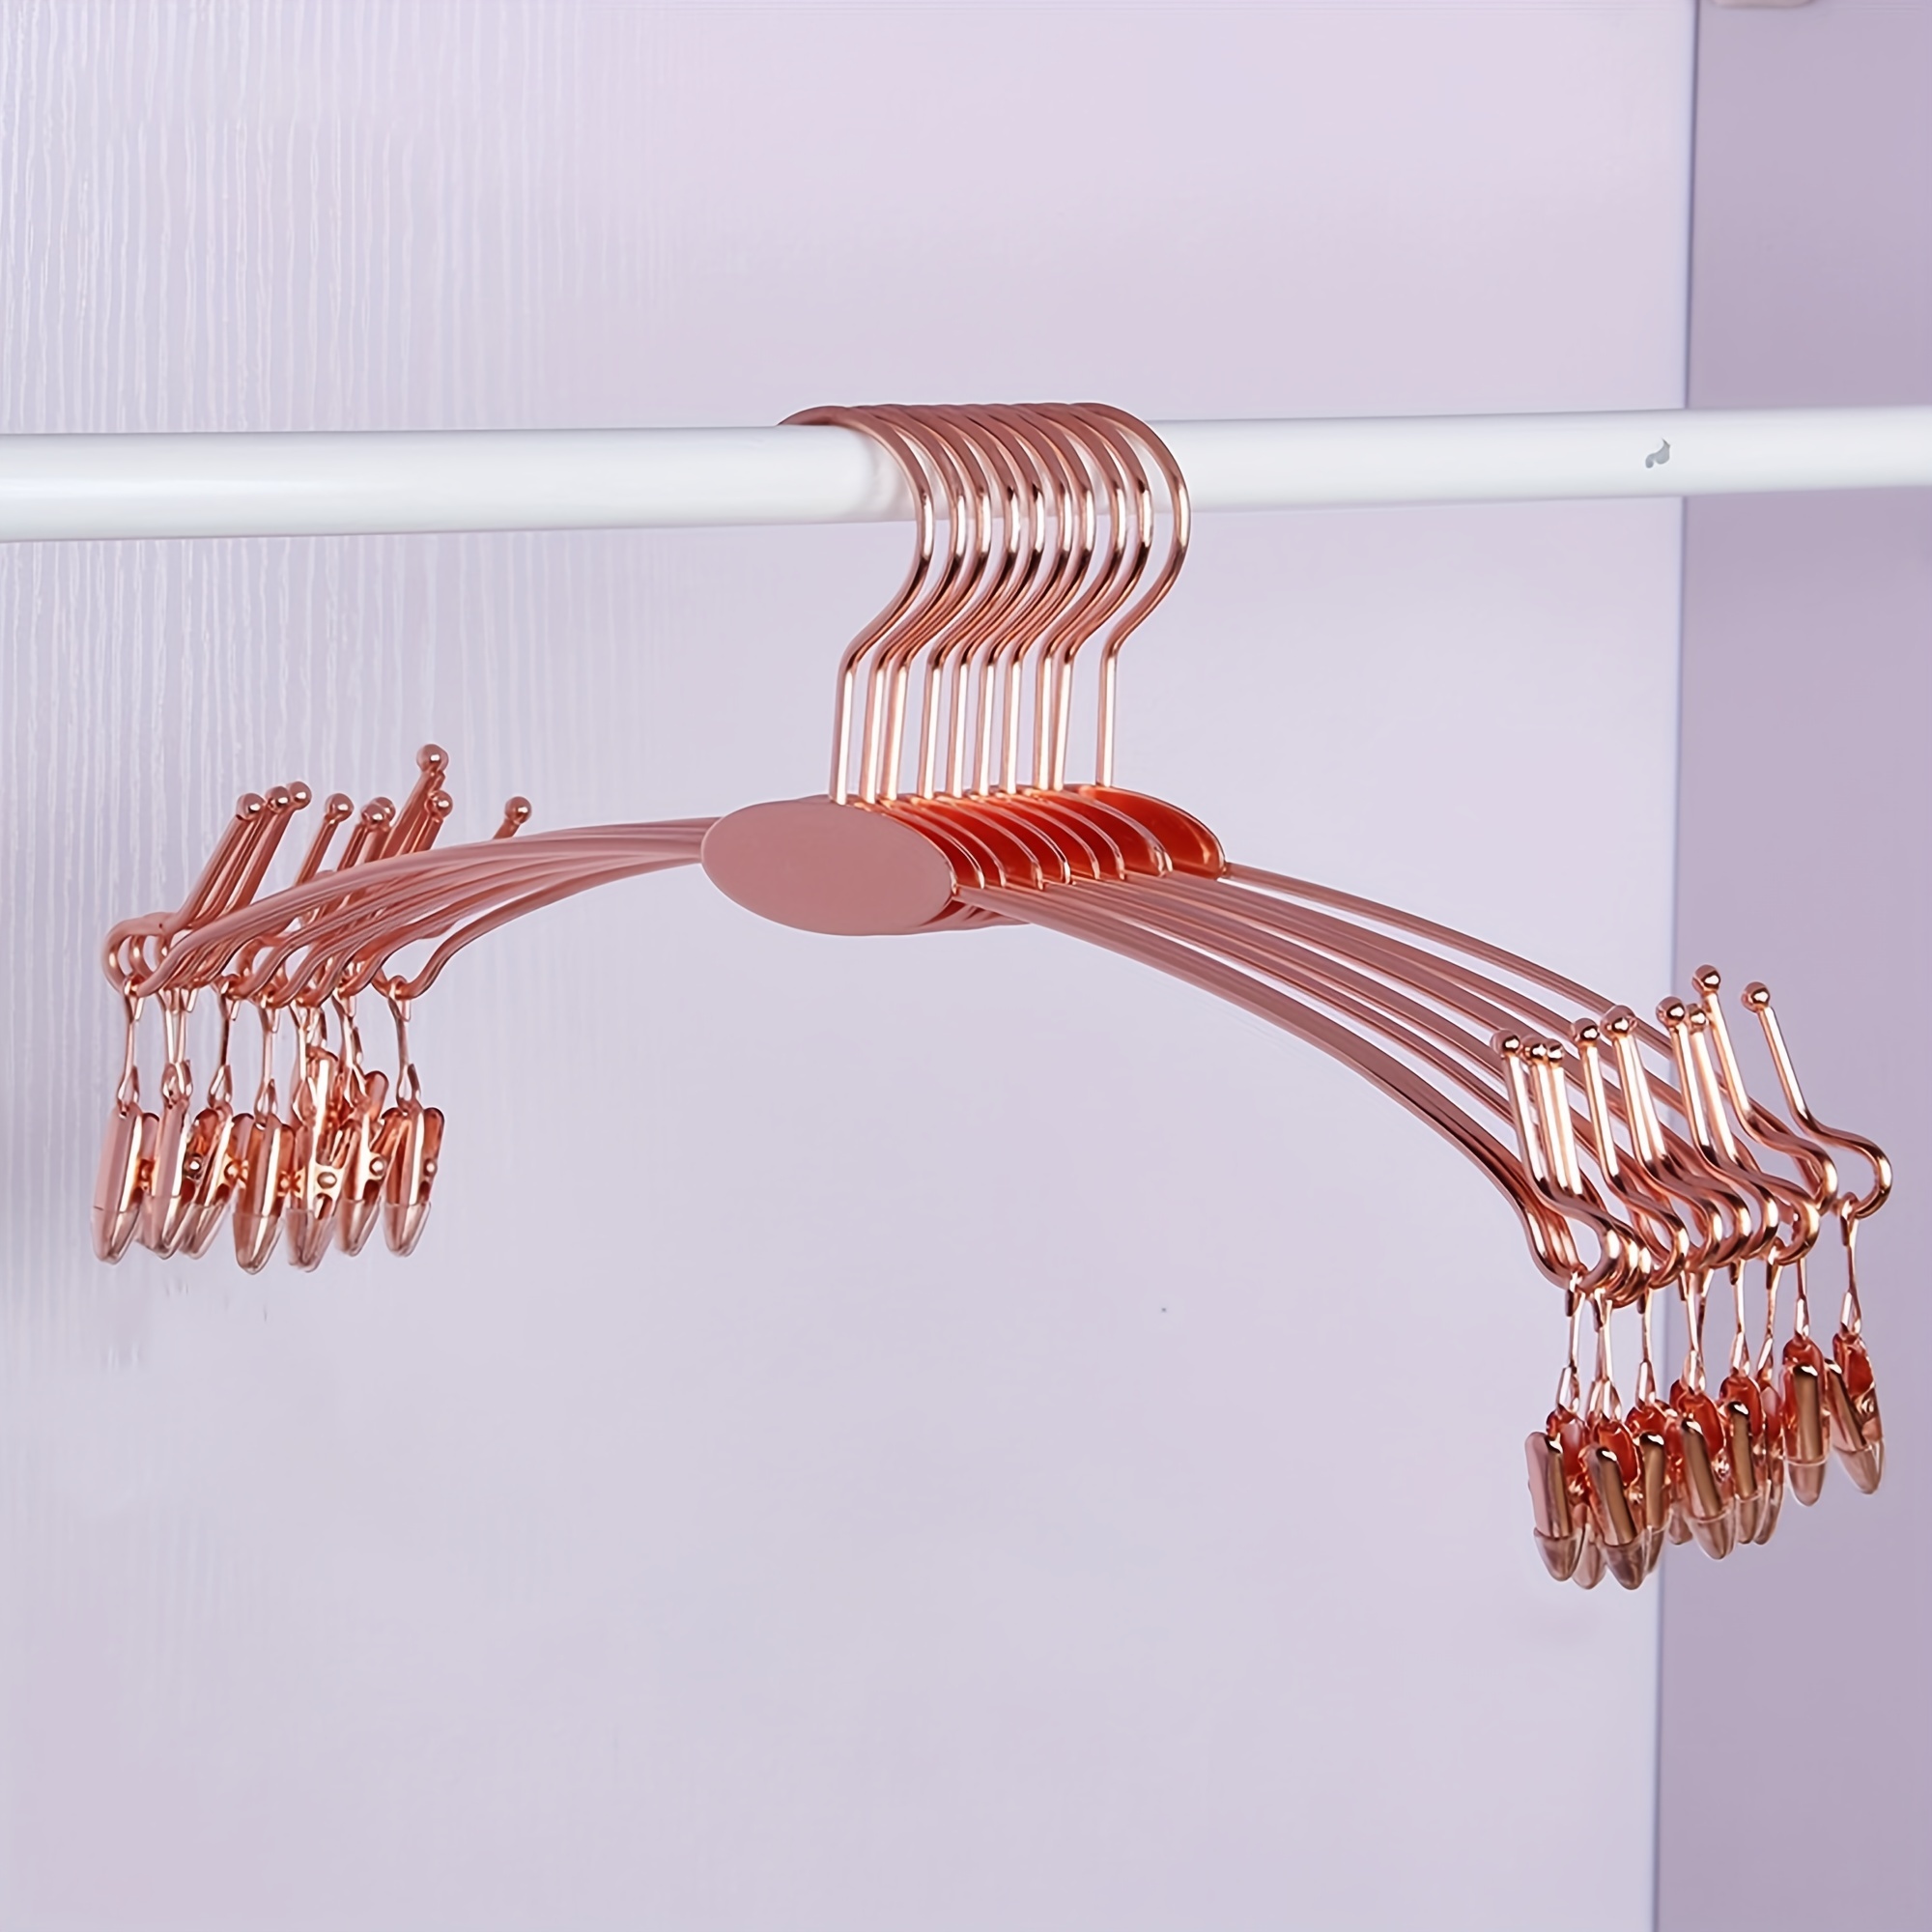 

Metal Underwear Bra Rack, Durable Pants Clothes Hangers With Clips, For Display, 10pcs